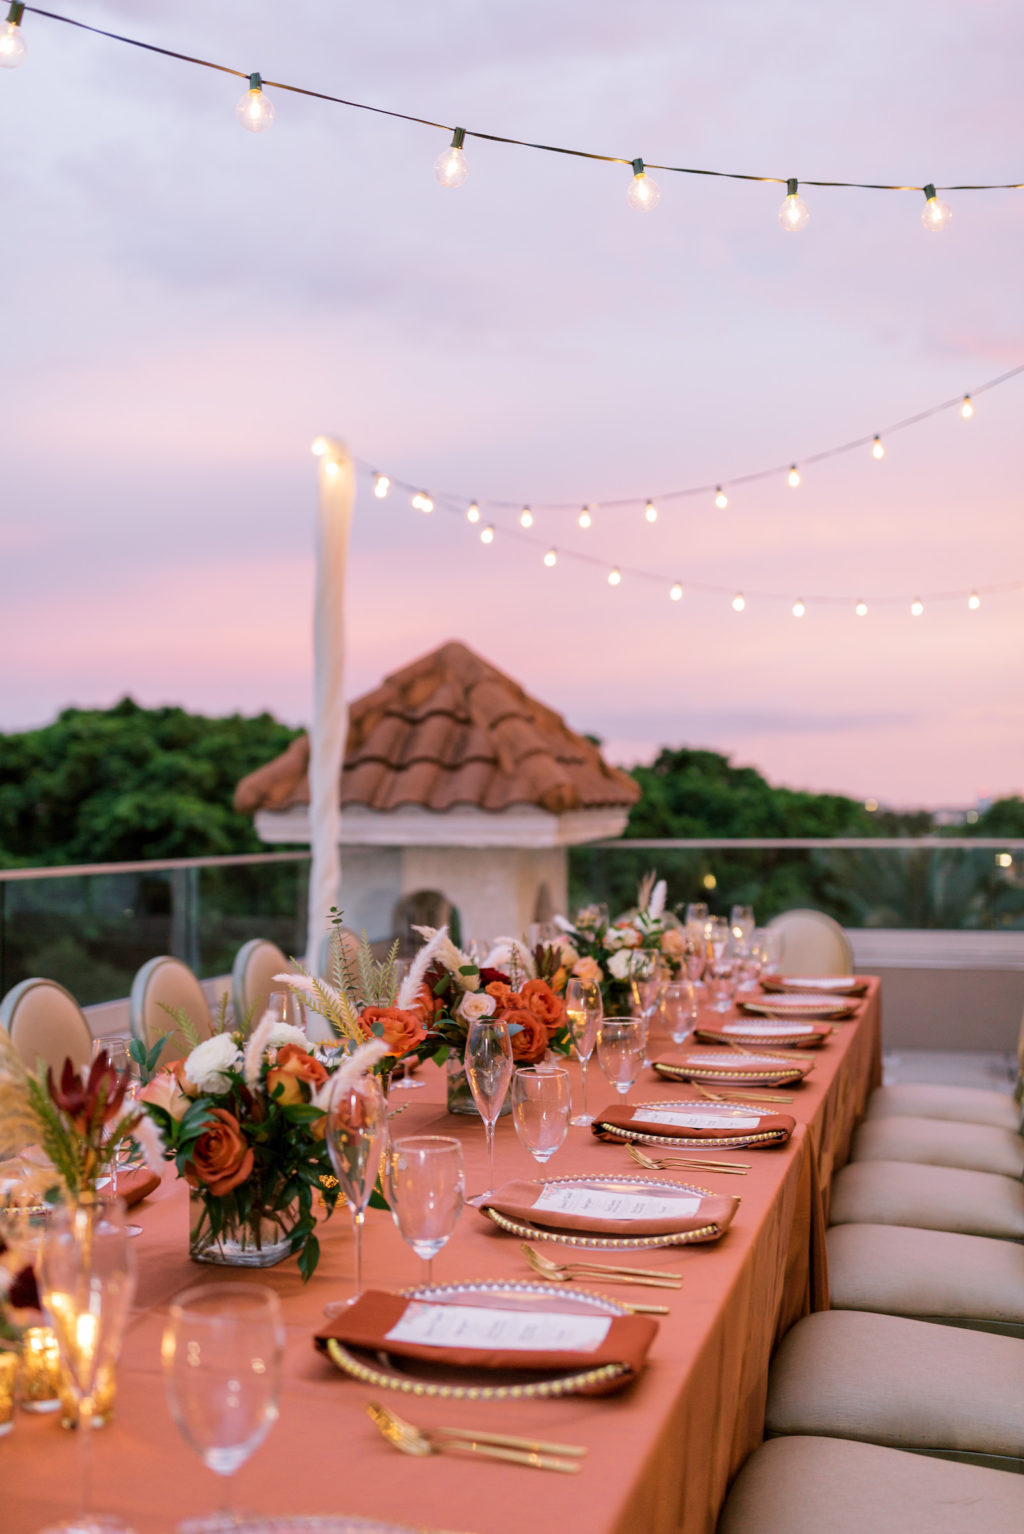 Outdoor Terrace Wedding Feasting Table at St. Pete Wedding Venue The Birchwood | Intimate Micro Wedding Elopement COVID Styled Shoot | Fall Autumn Wedding Inspiration | Hotel Terrace Reception with Canopy String Lights Orange Copper Wedding Table Linens | Gold Beaded Glass Chargers with Napkin and Menu Card and Gold Flatware | Wedding Centerpiece with Orange White and Peach Roses